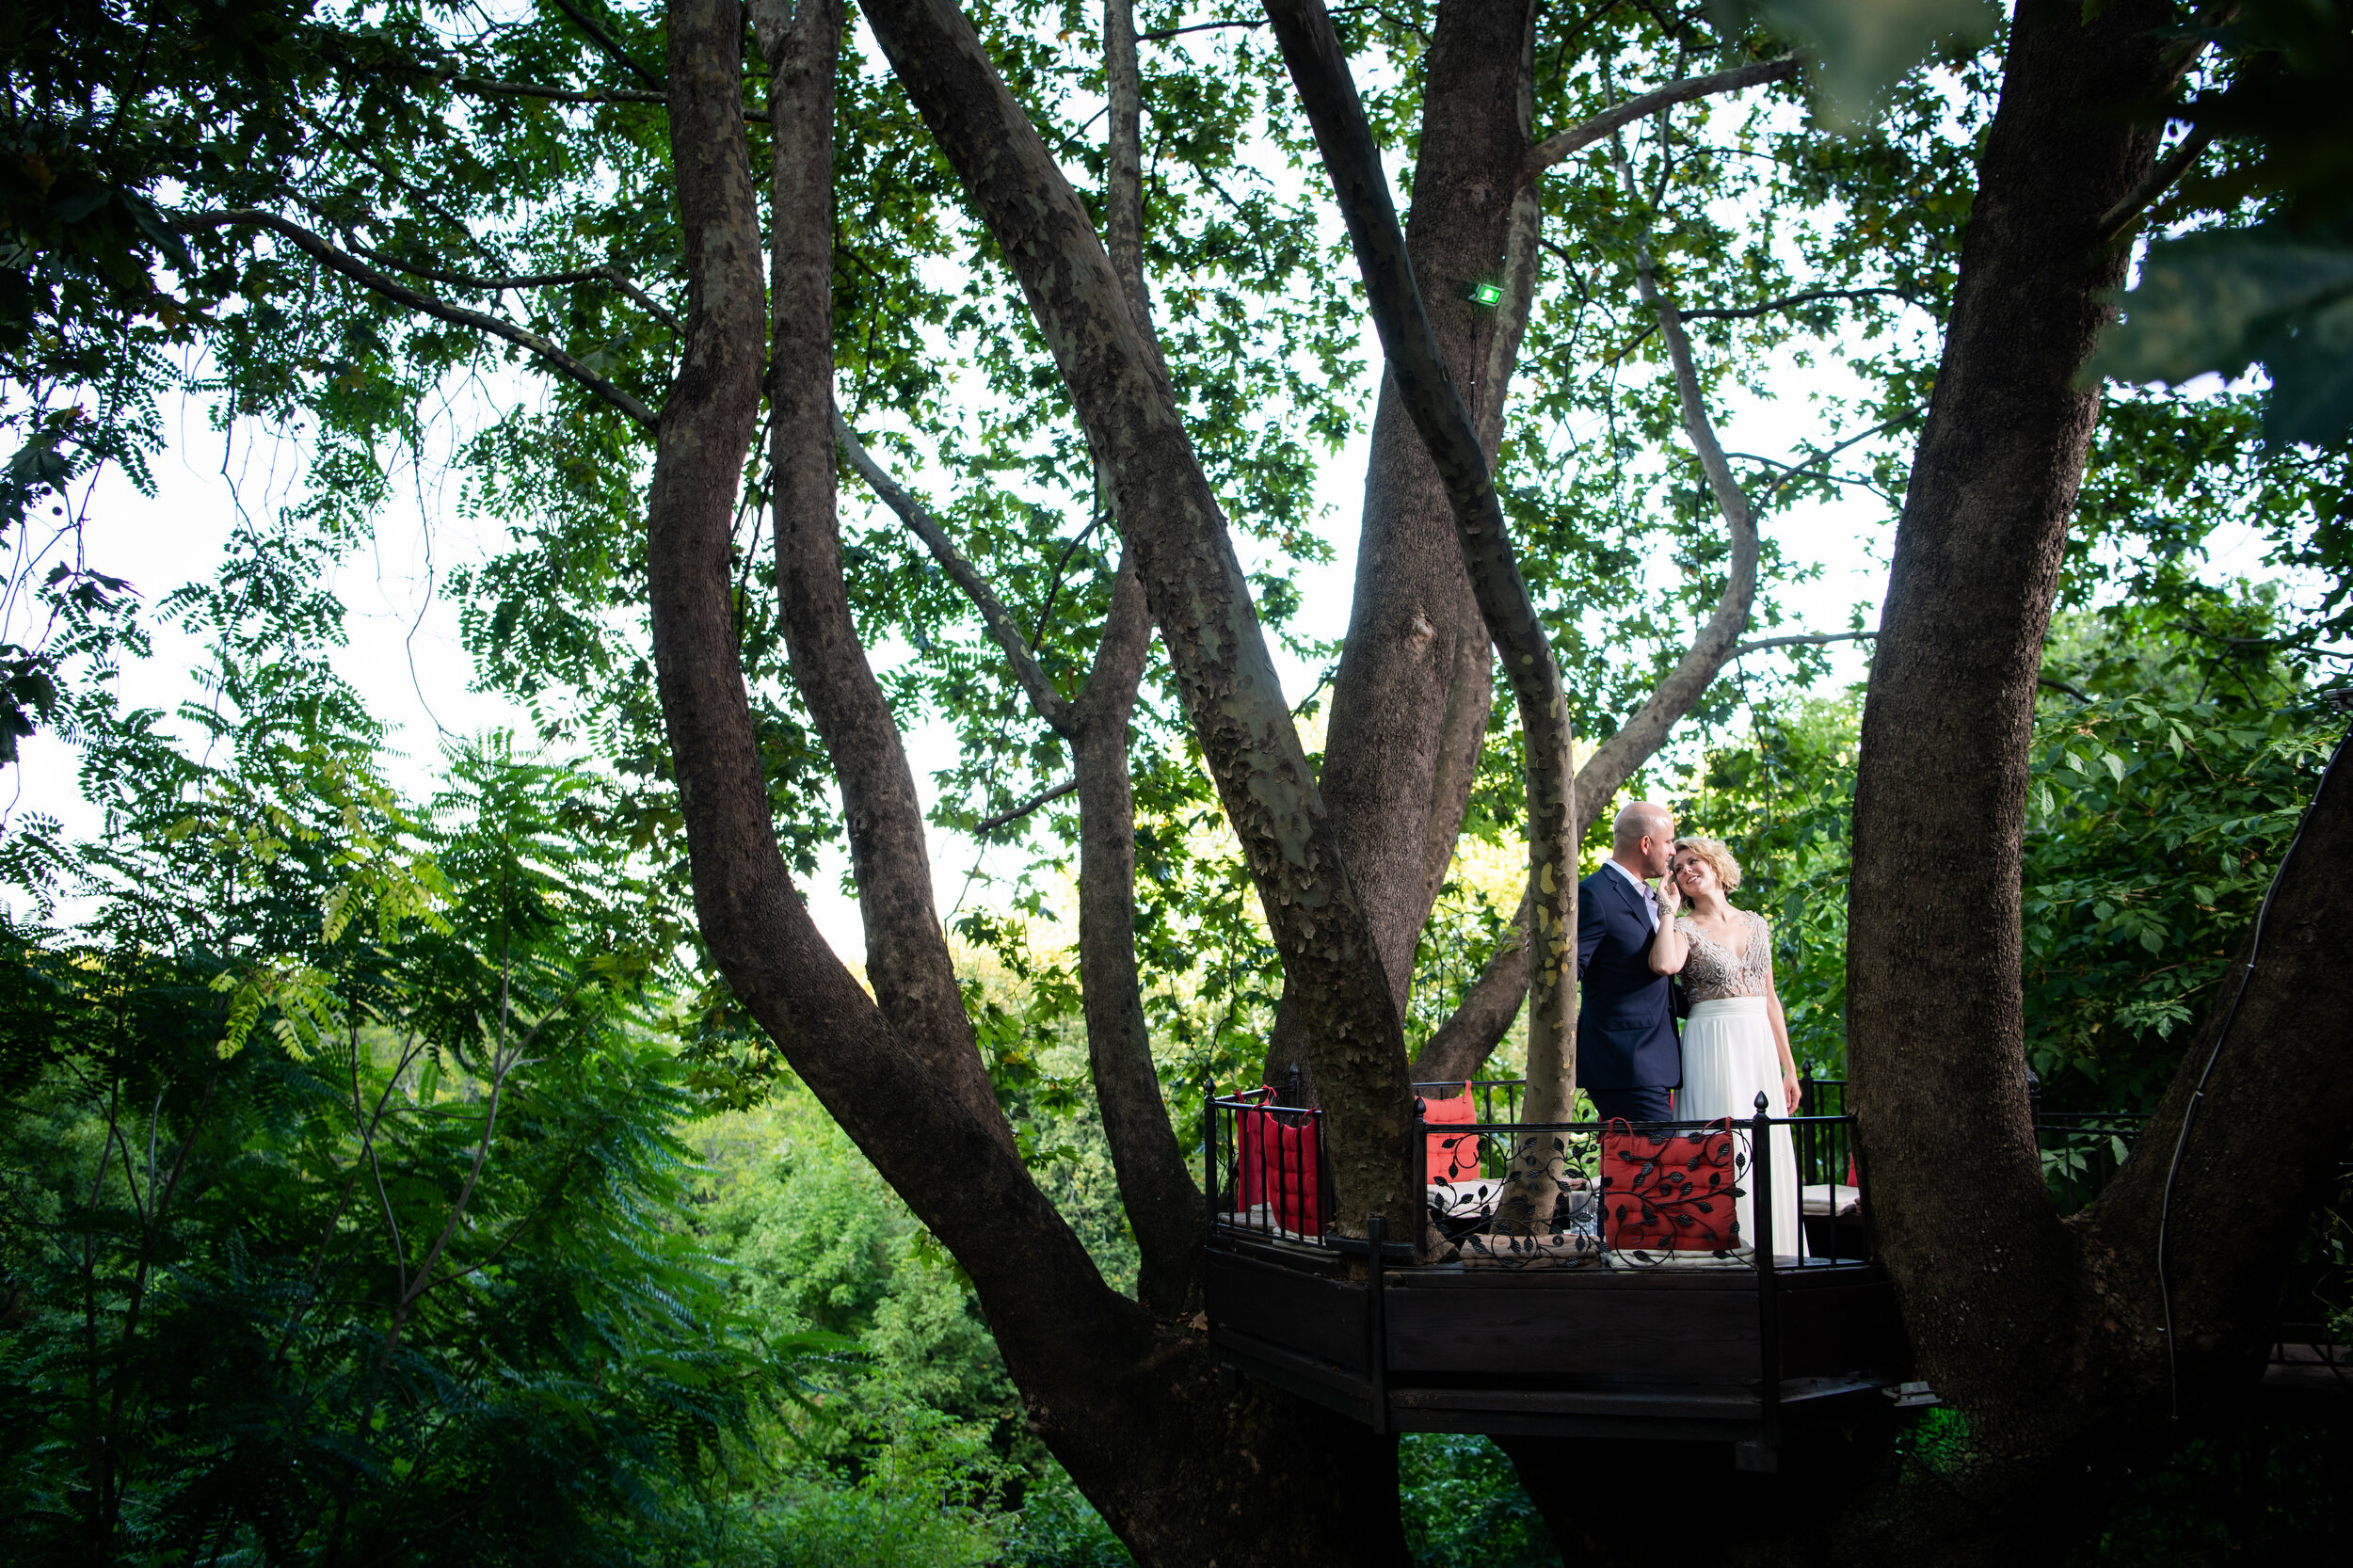 Creative edgy portrait of the bride and groom in a tree house:  destination wedding photo at the Lost Unicorn Hotel, Tsagarada, Greece by J. Brown Photography.